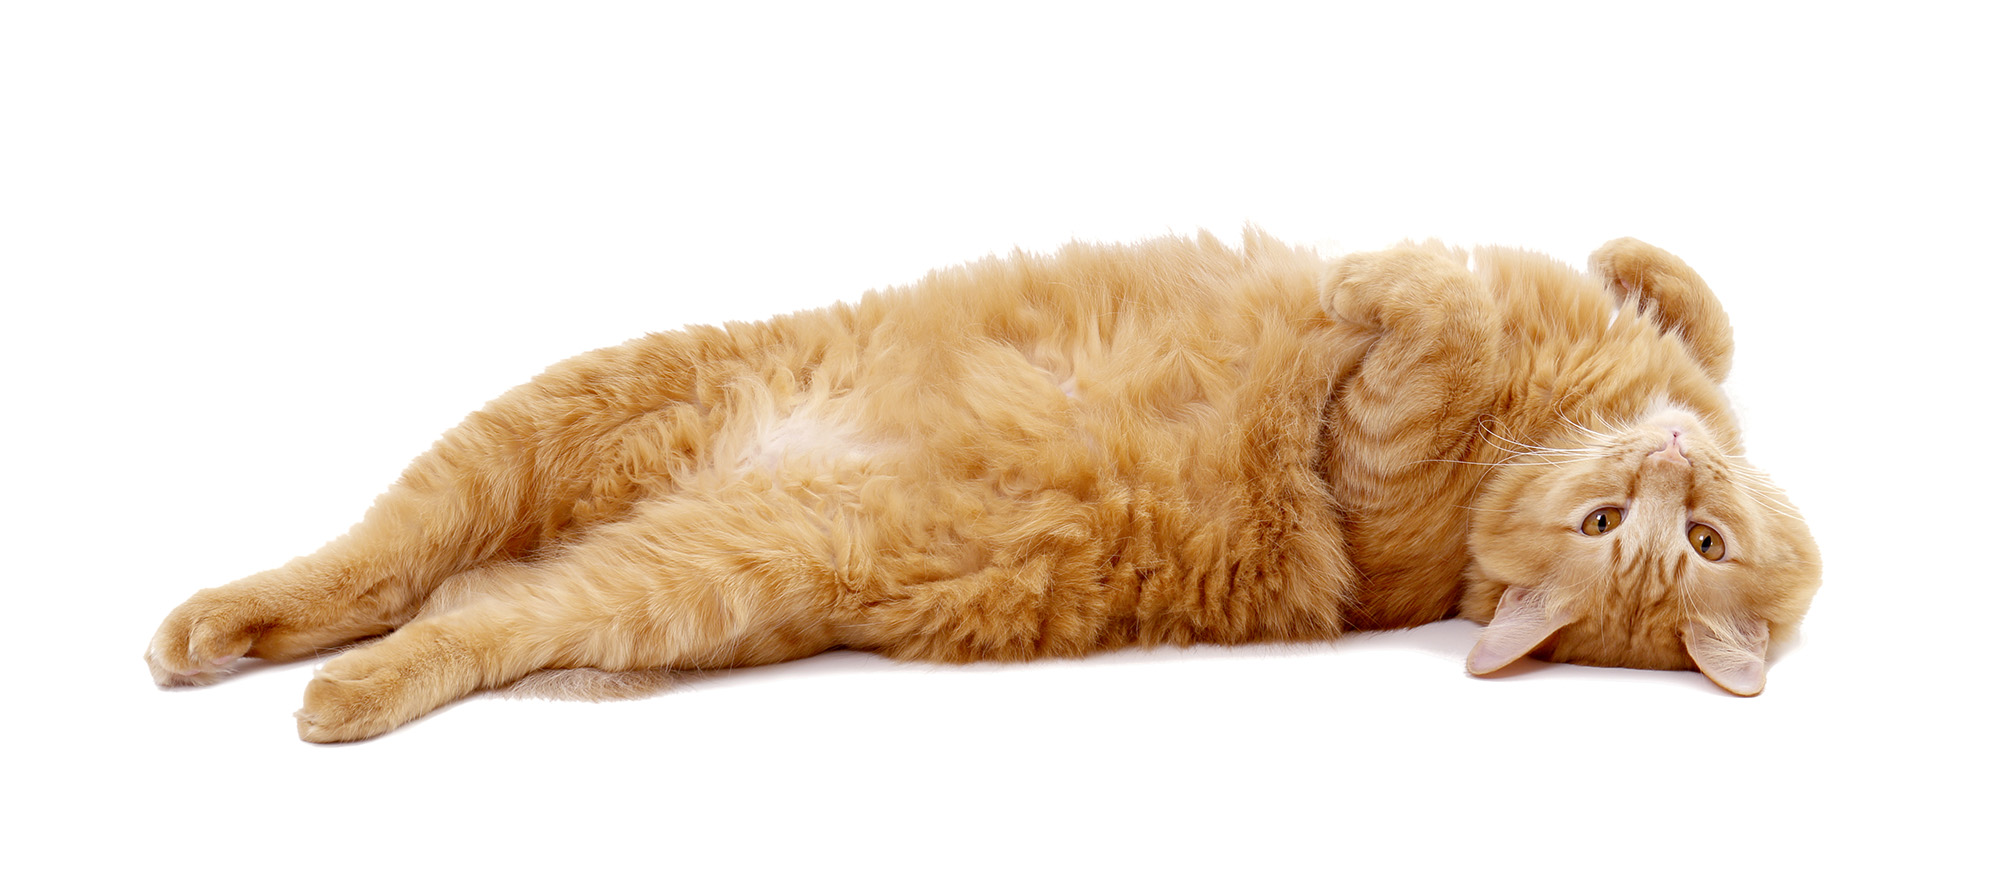 The ginger tabby cat lying on the white background.